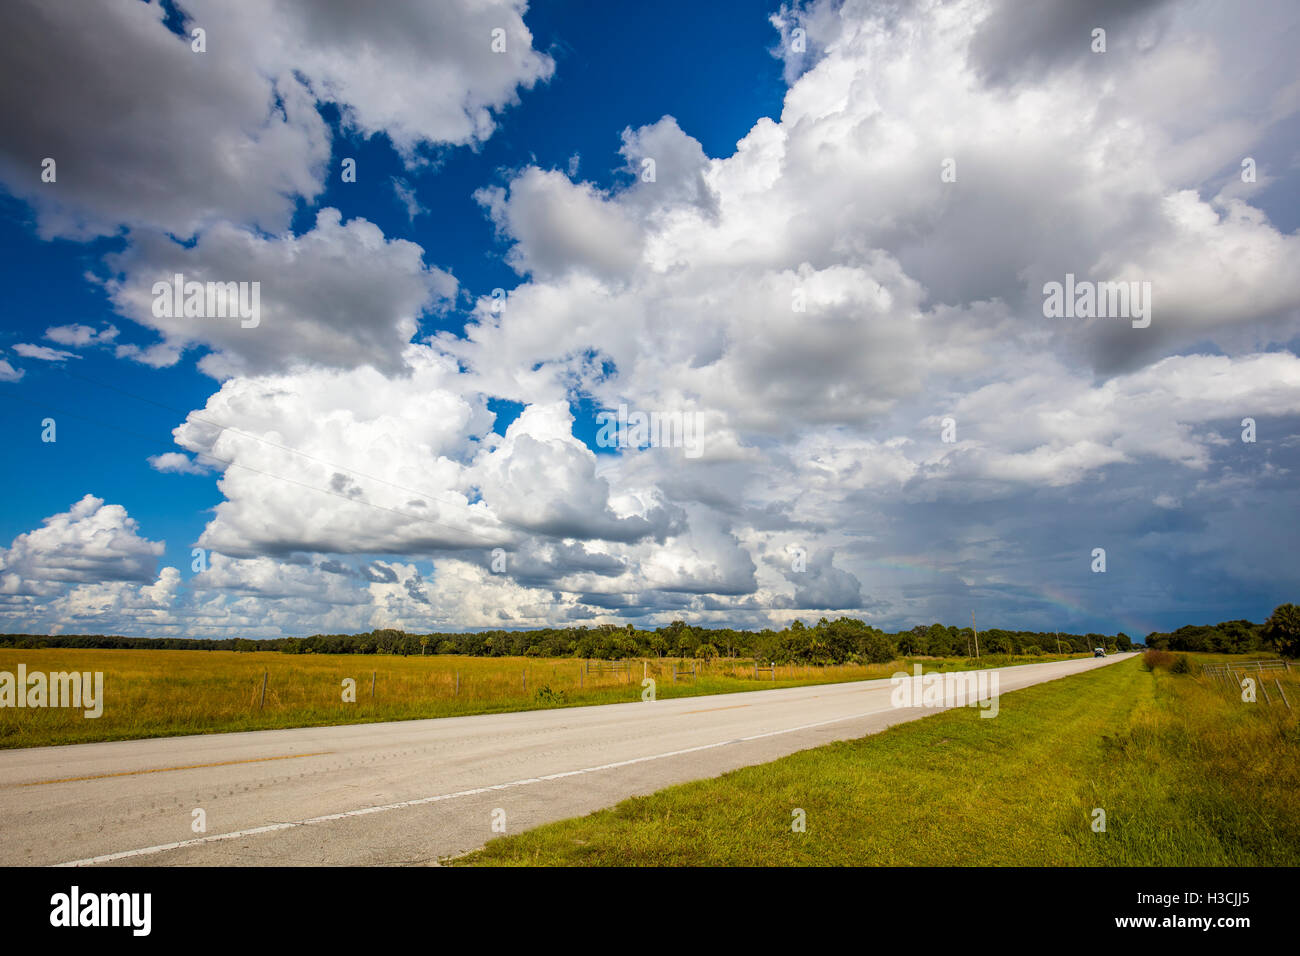 Road running into the distance with big dramatic white storm clouds in blue sky in Southwestern Florida Stock Photo